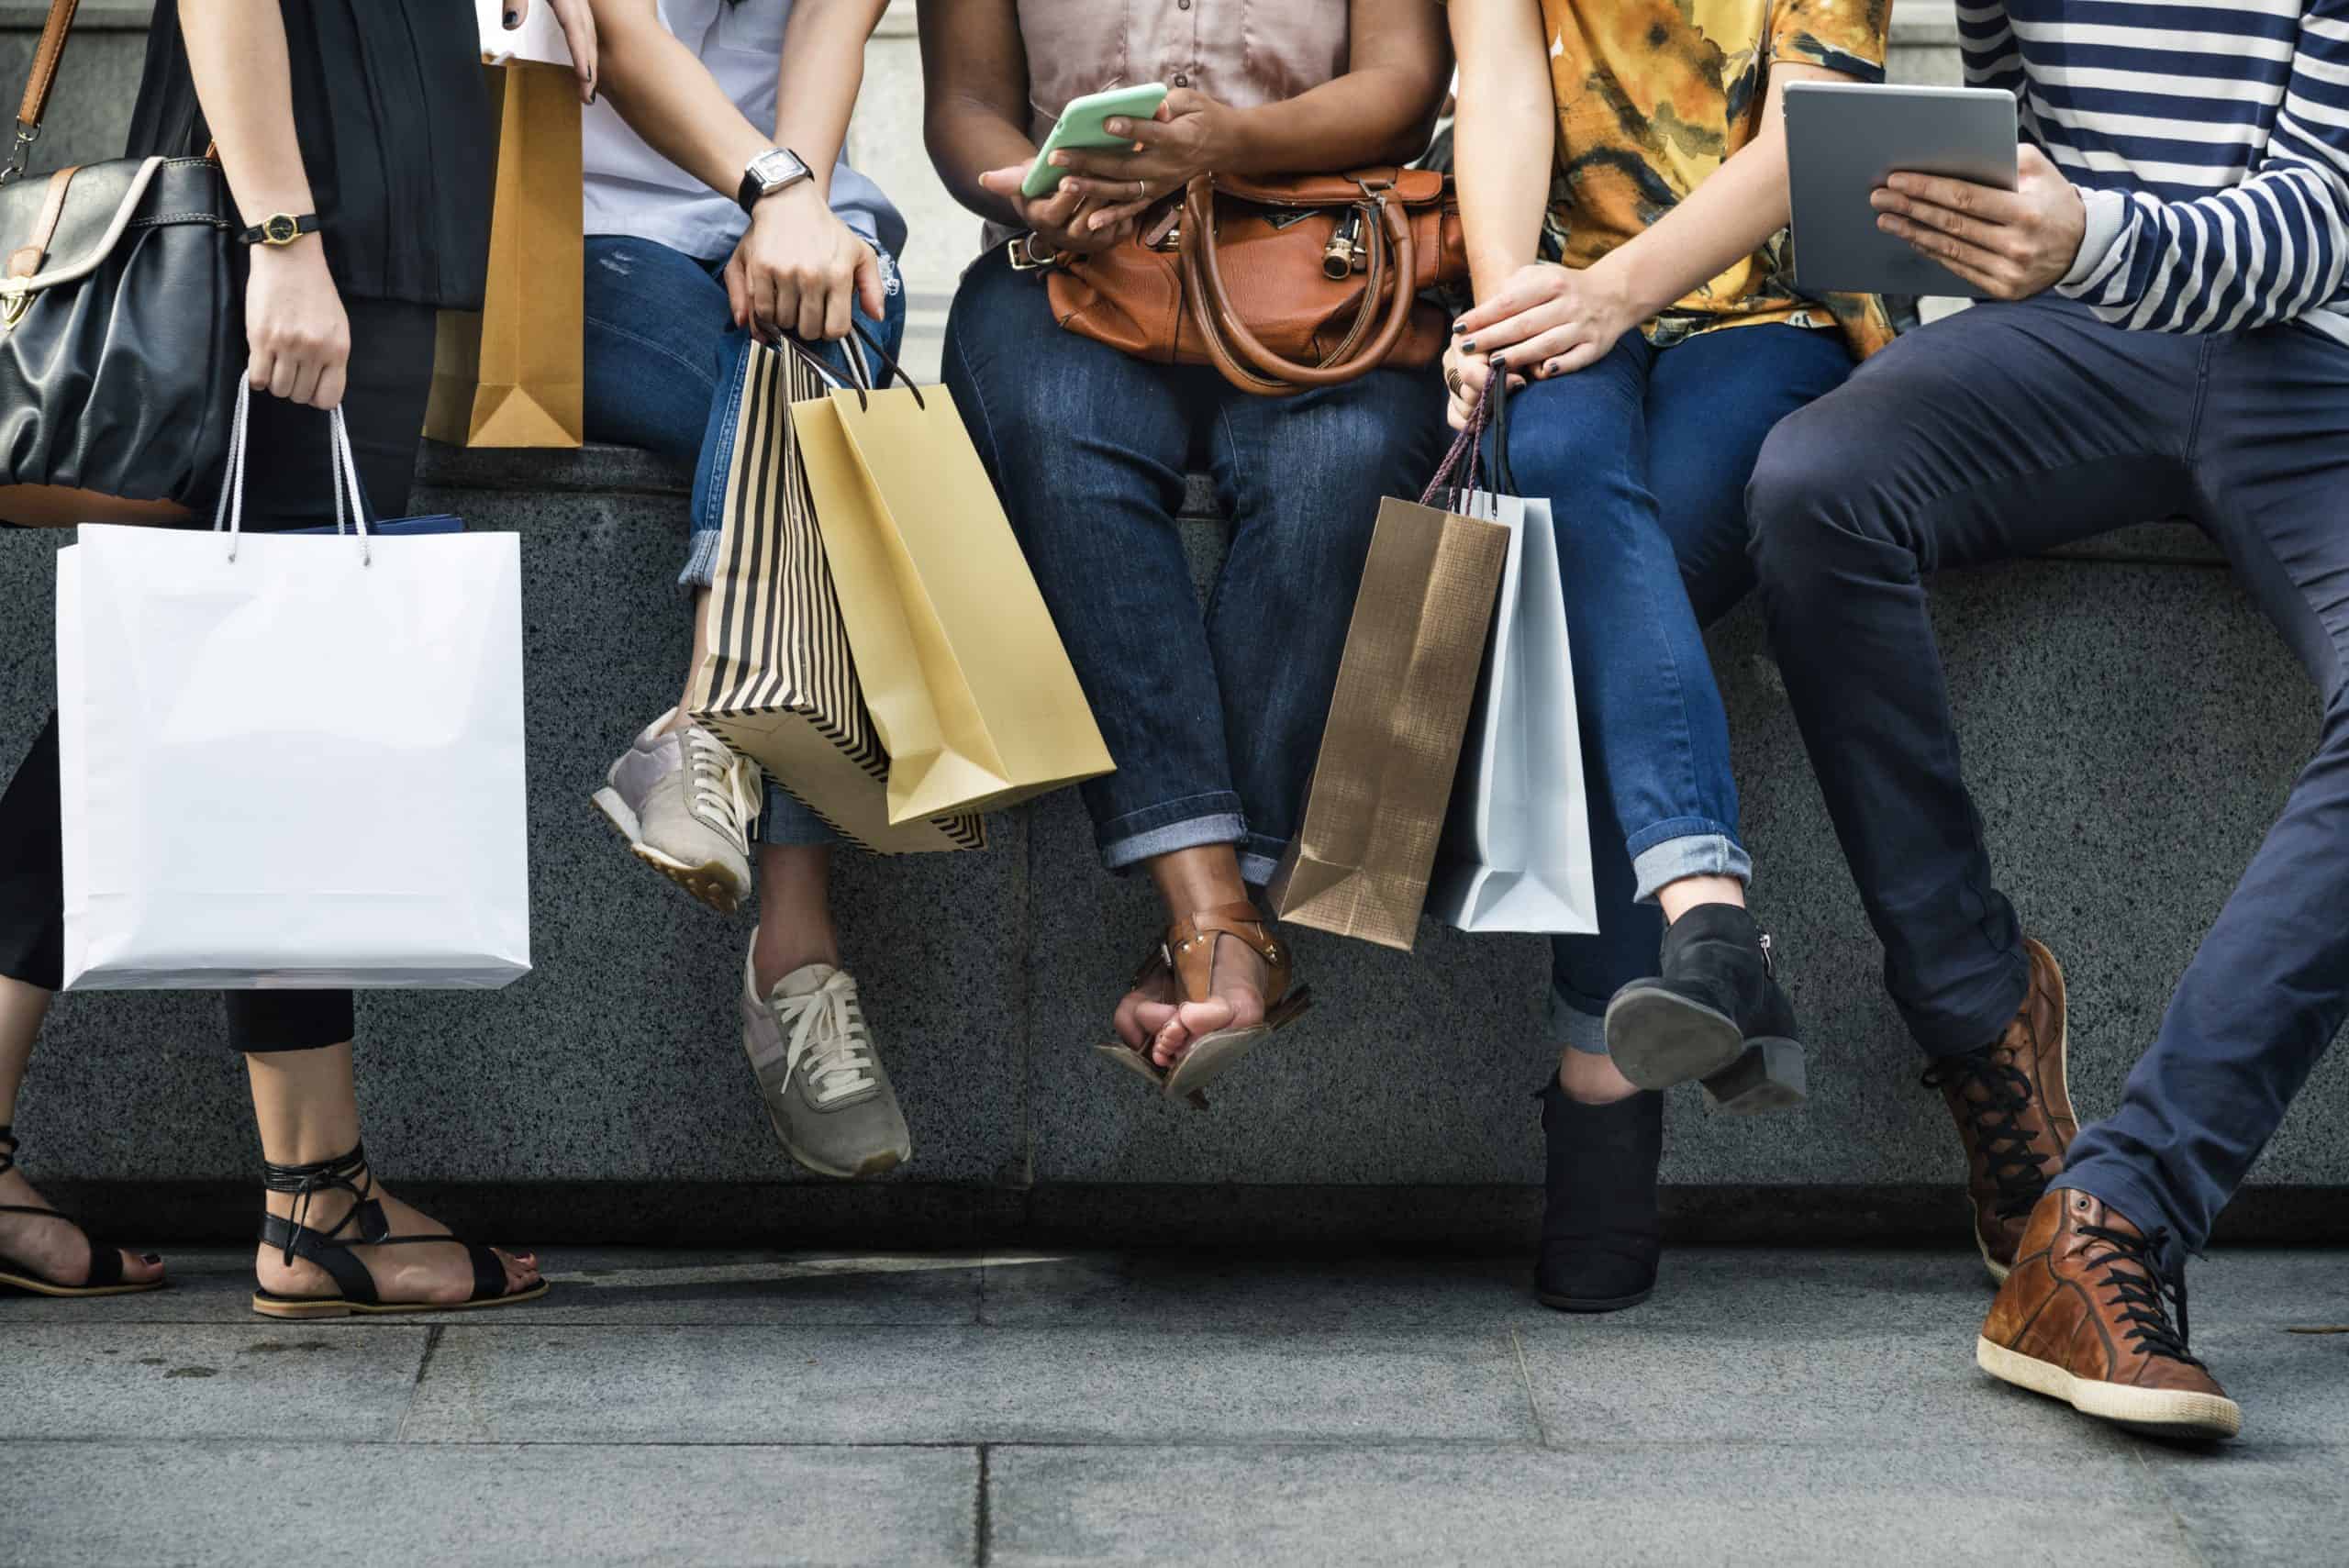 A group of people holding shopping bags